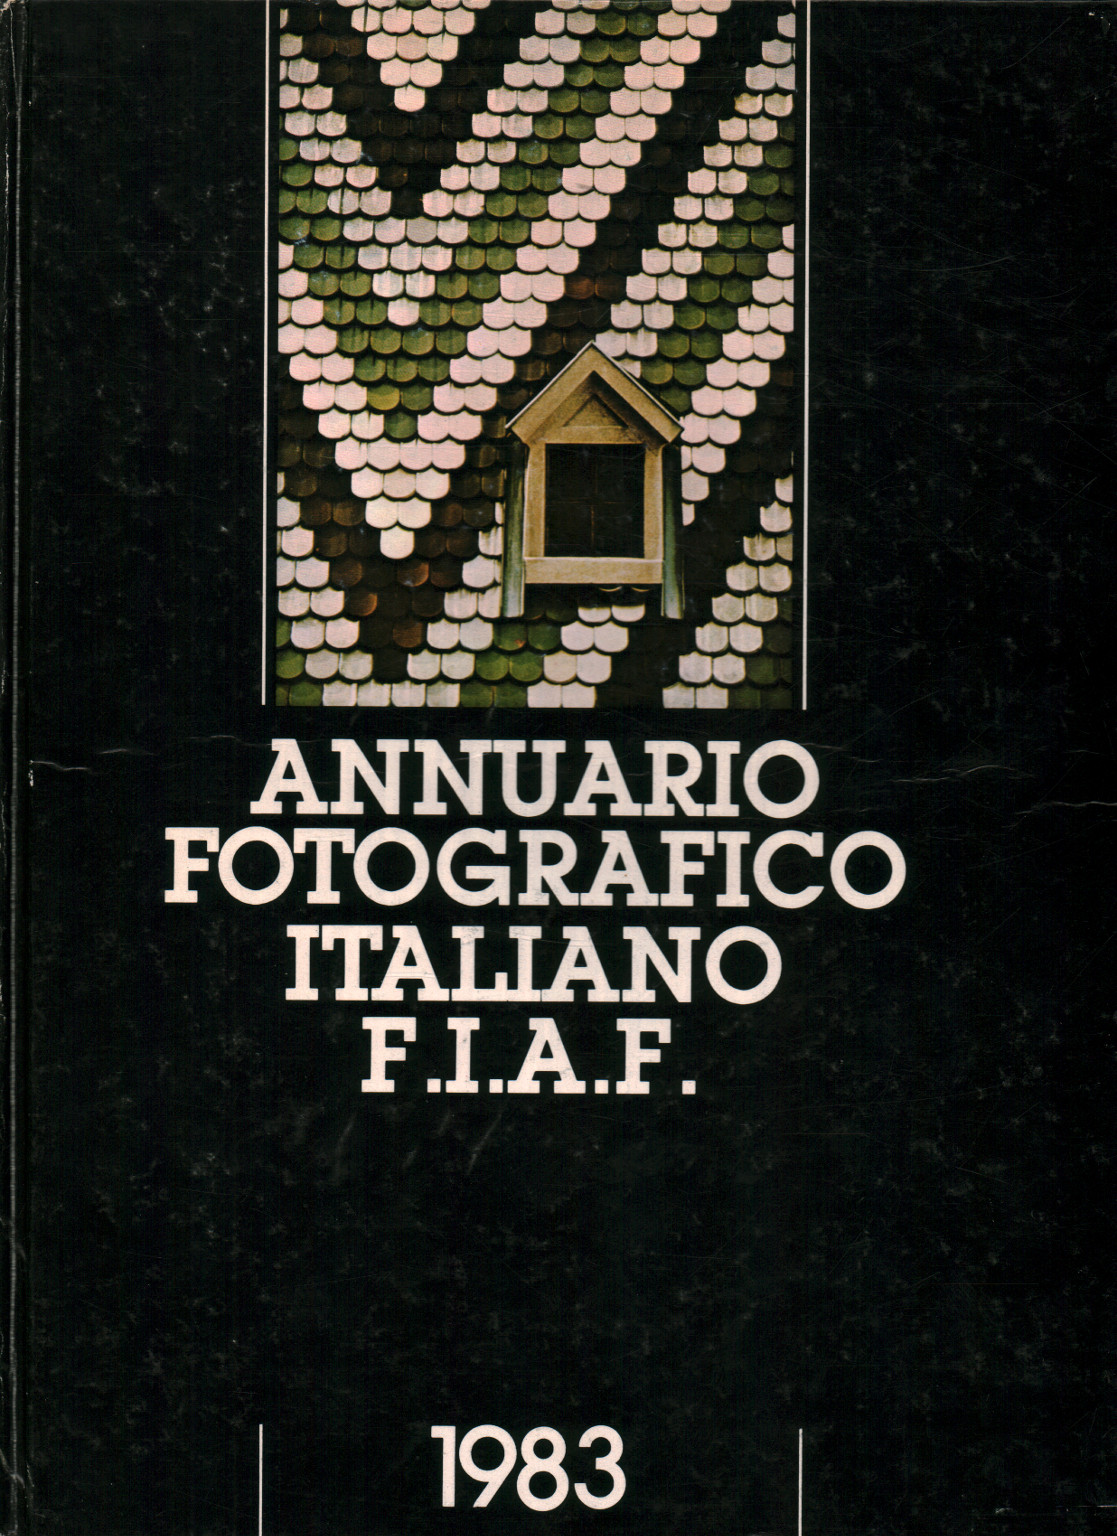 The Italian photographic yearbook F.I.A.F 1983, s.a.